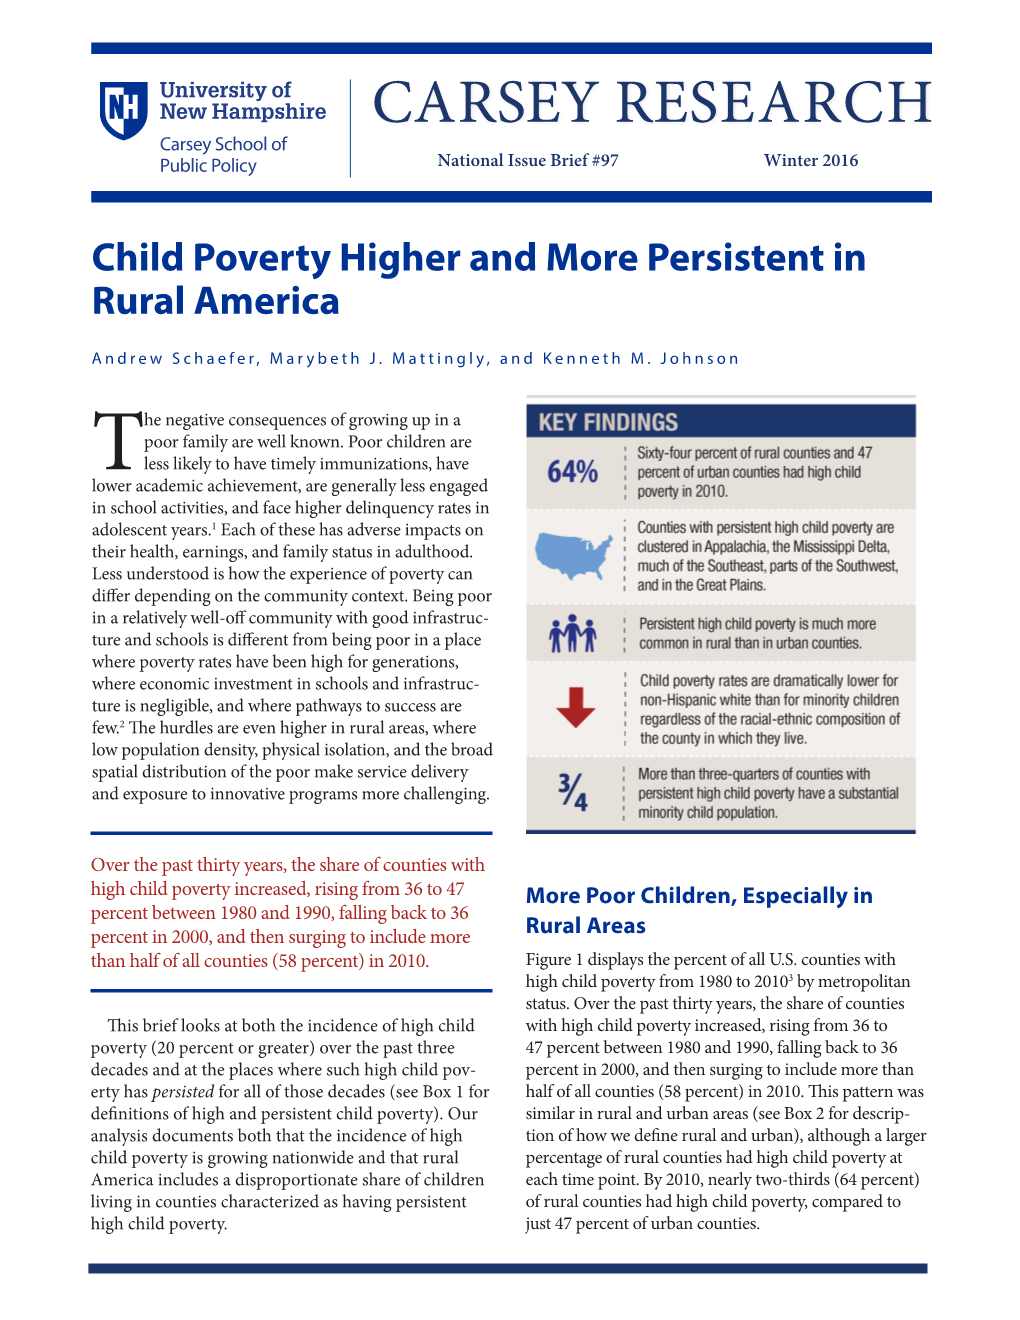 Child Poverty Higher and More Persistent in Rural America